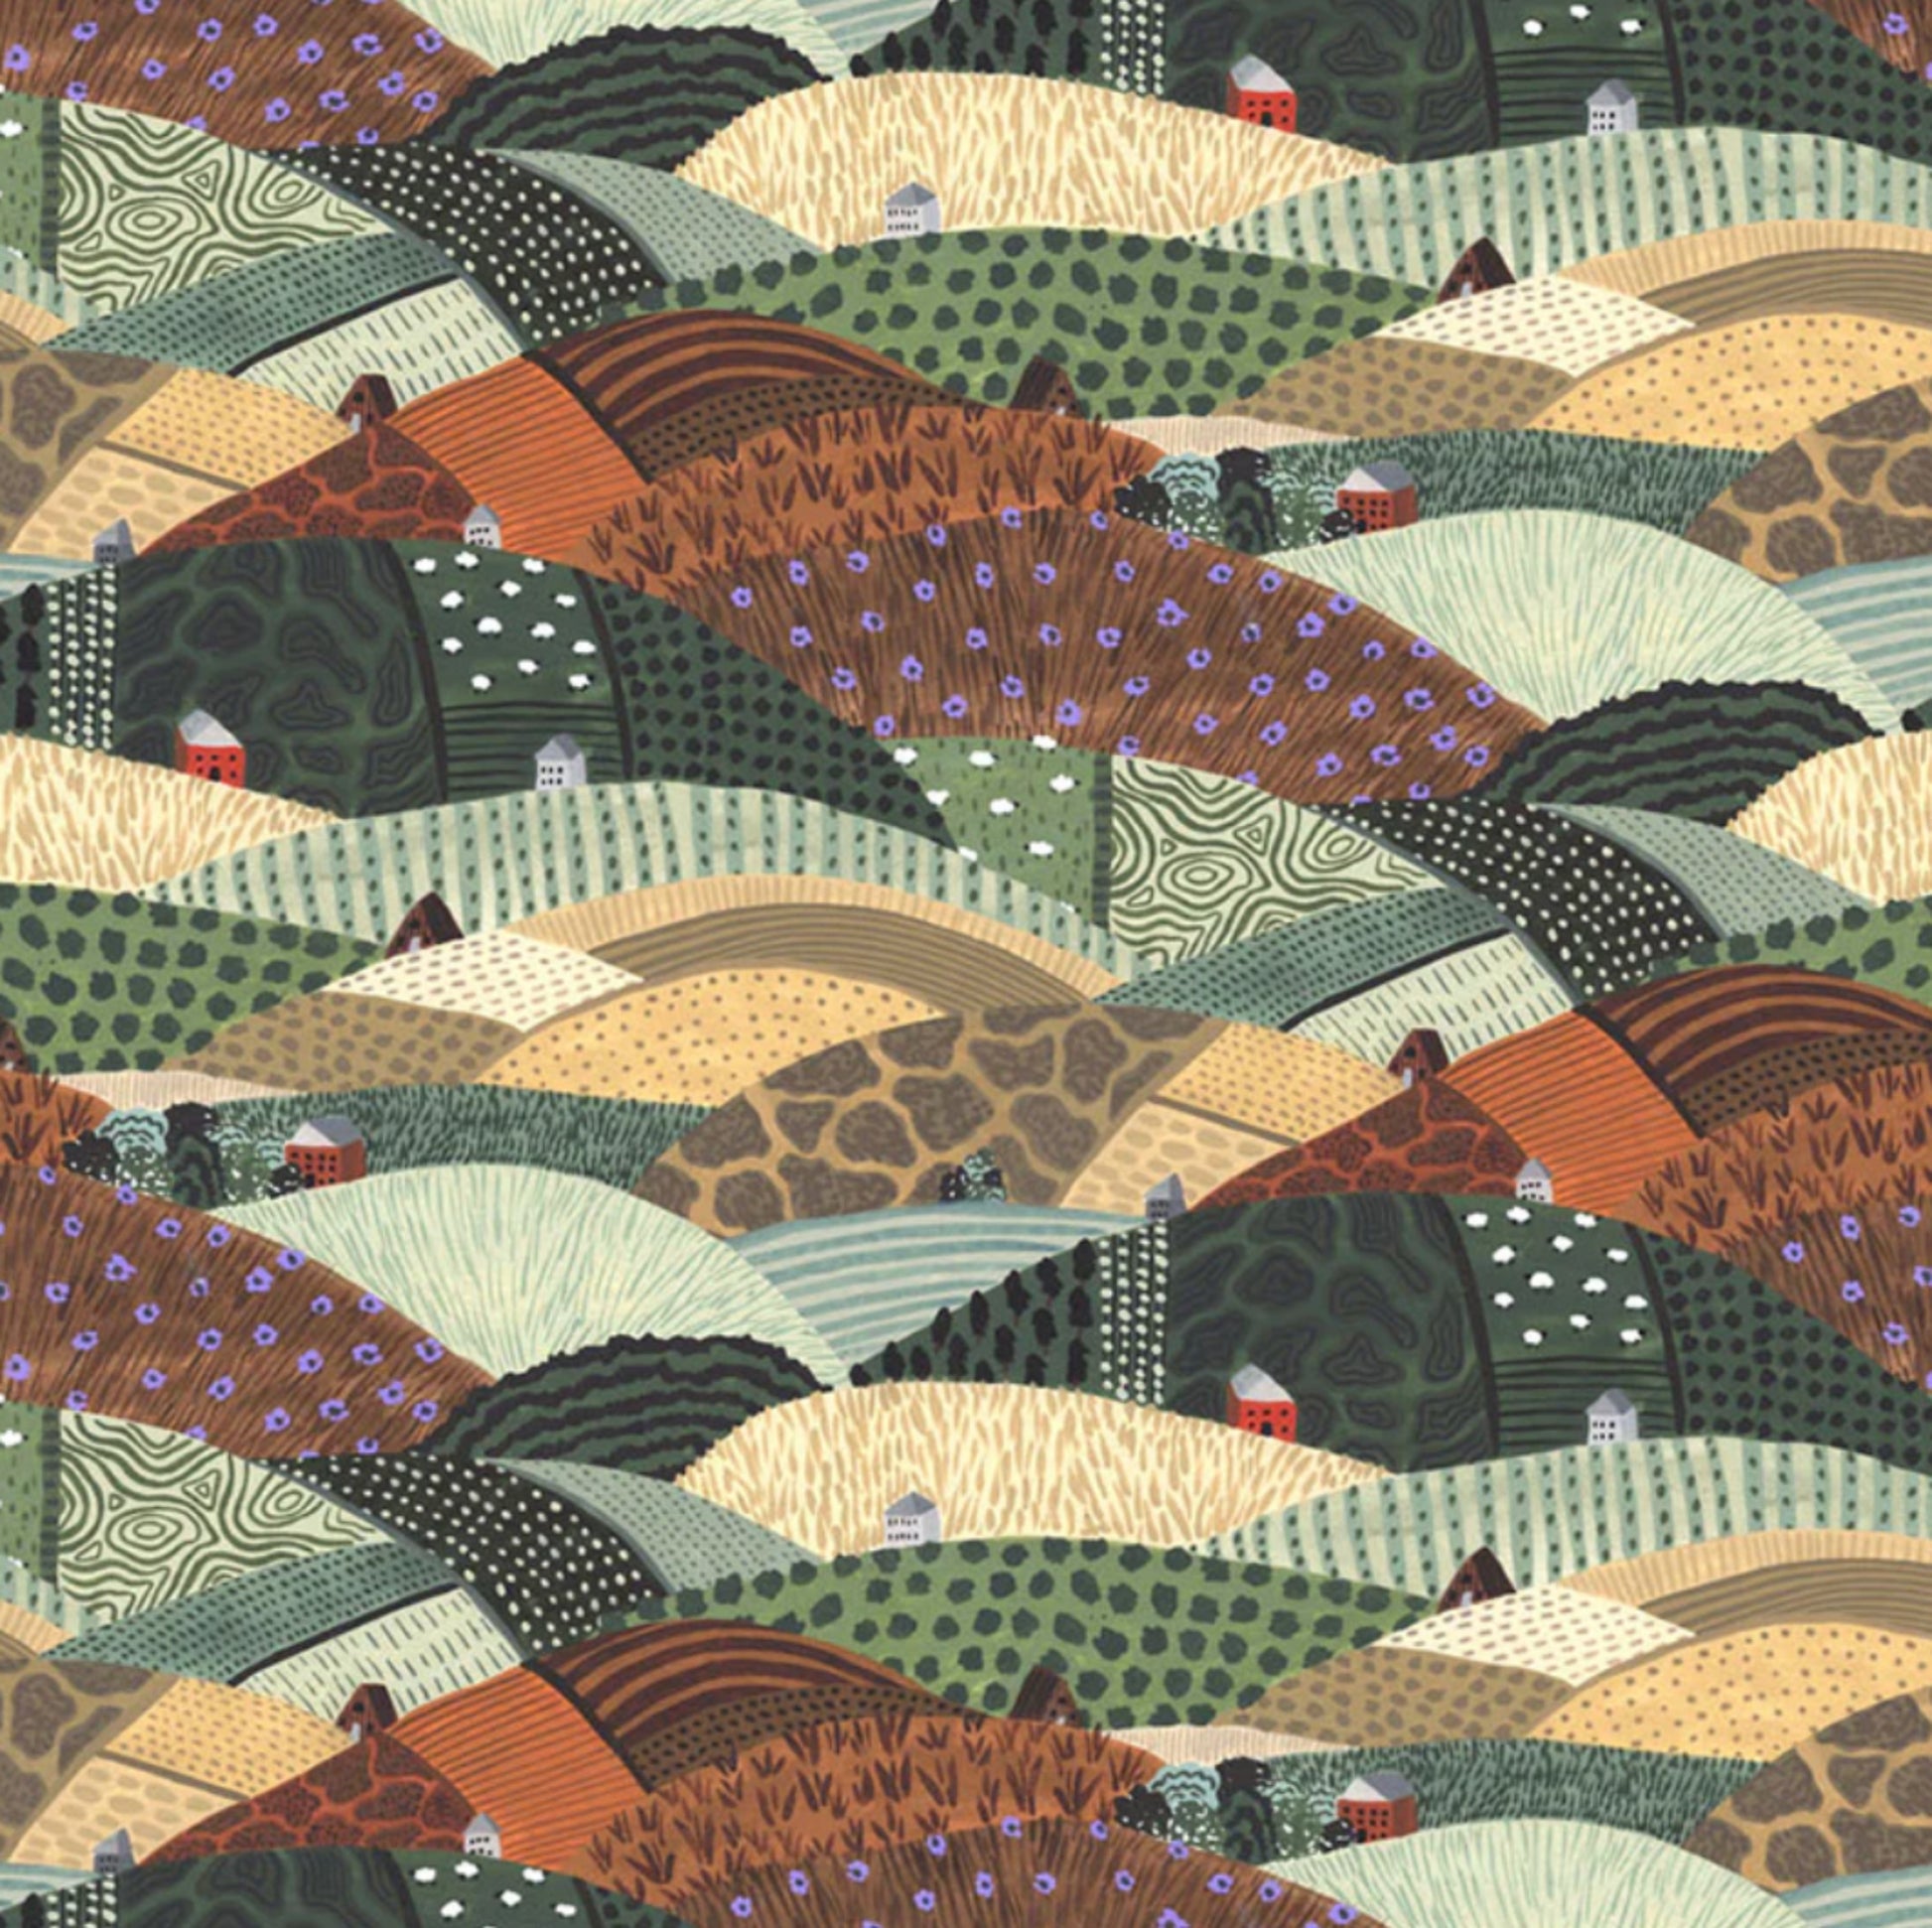 Hills from the Trek Collection by Boccaccini Meadows for Figo Fabrics. 100 cotton, digitally printed. Earthy tone "Hills" fabric.